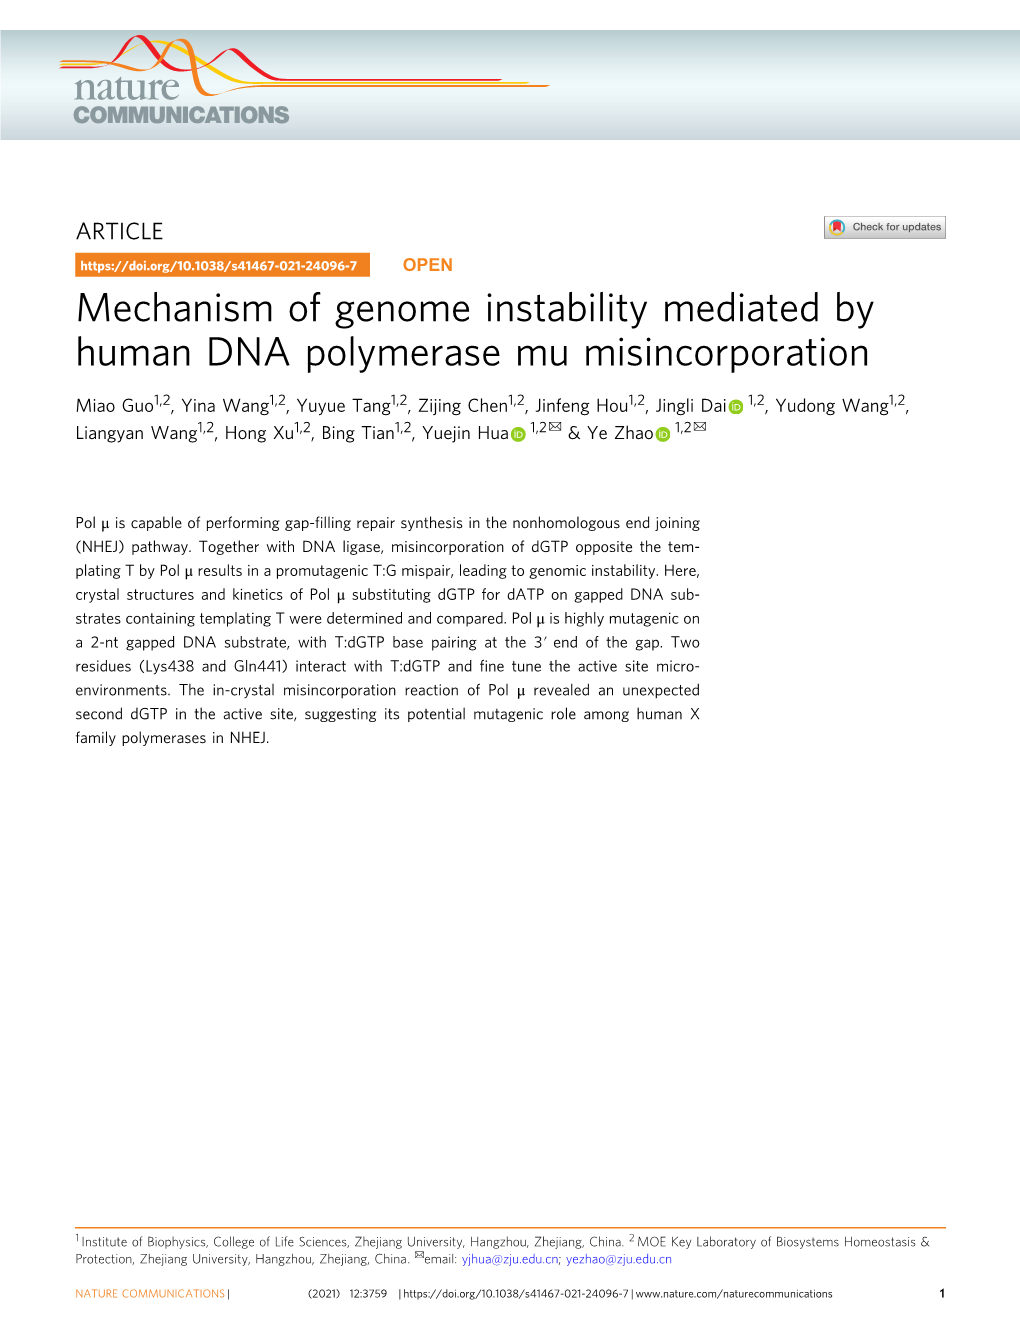 Mechanism of Genome Instability Mediated by Human DNA Polymerase Mu Misincorporation